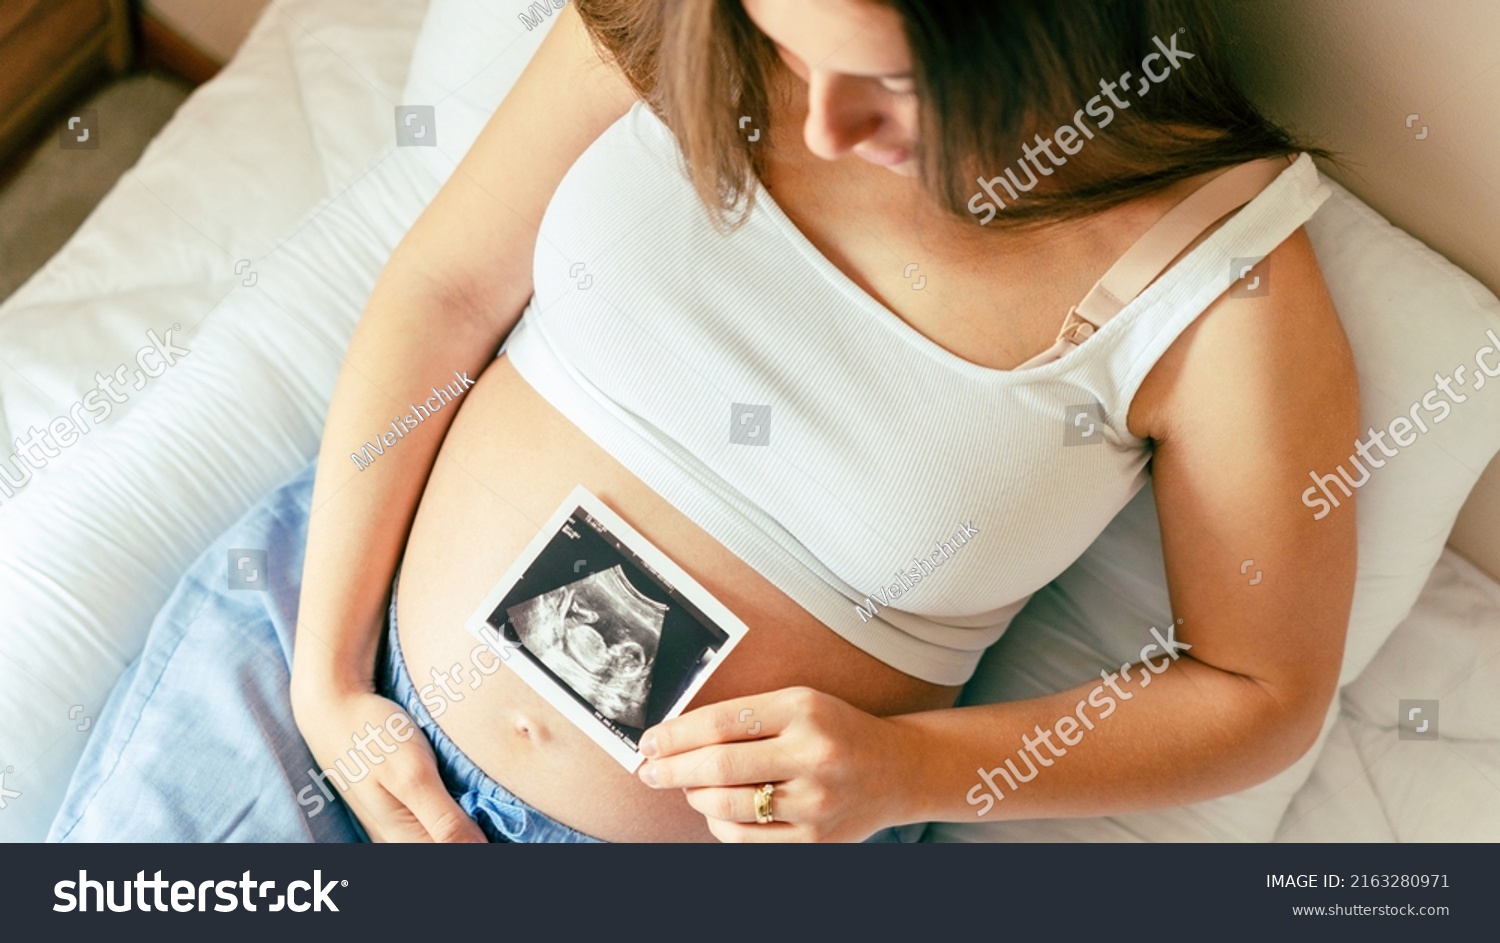 Ultrasound photo pregnancy baby. Woman holding ultrasound pregnant picture. Concept maternity, pregnancy, childbirth #2163280971